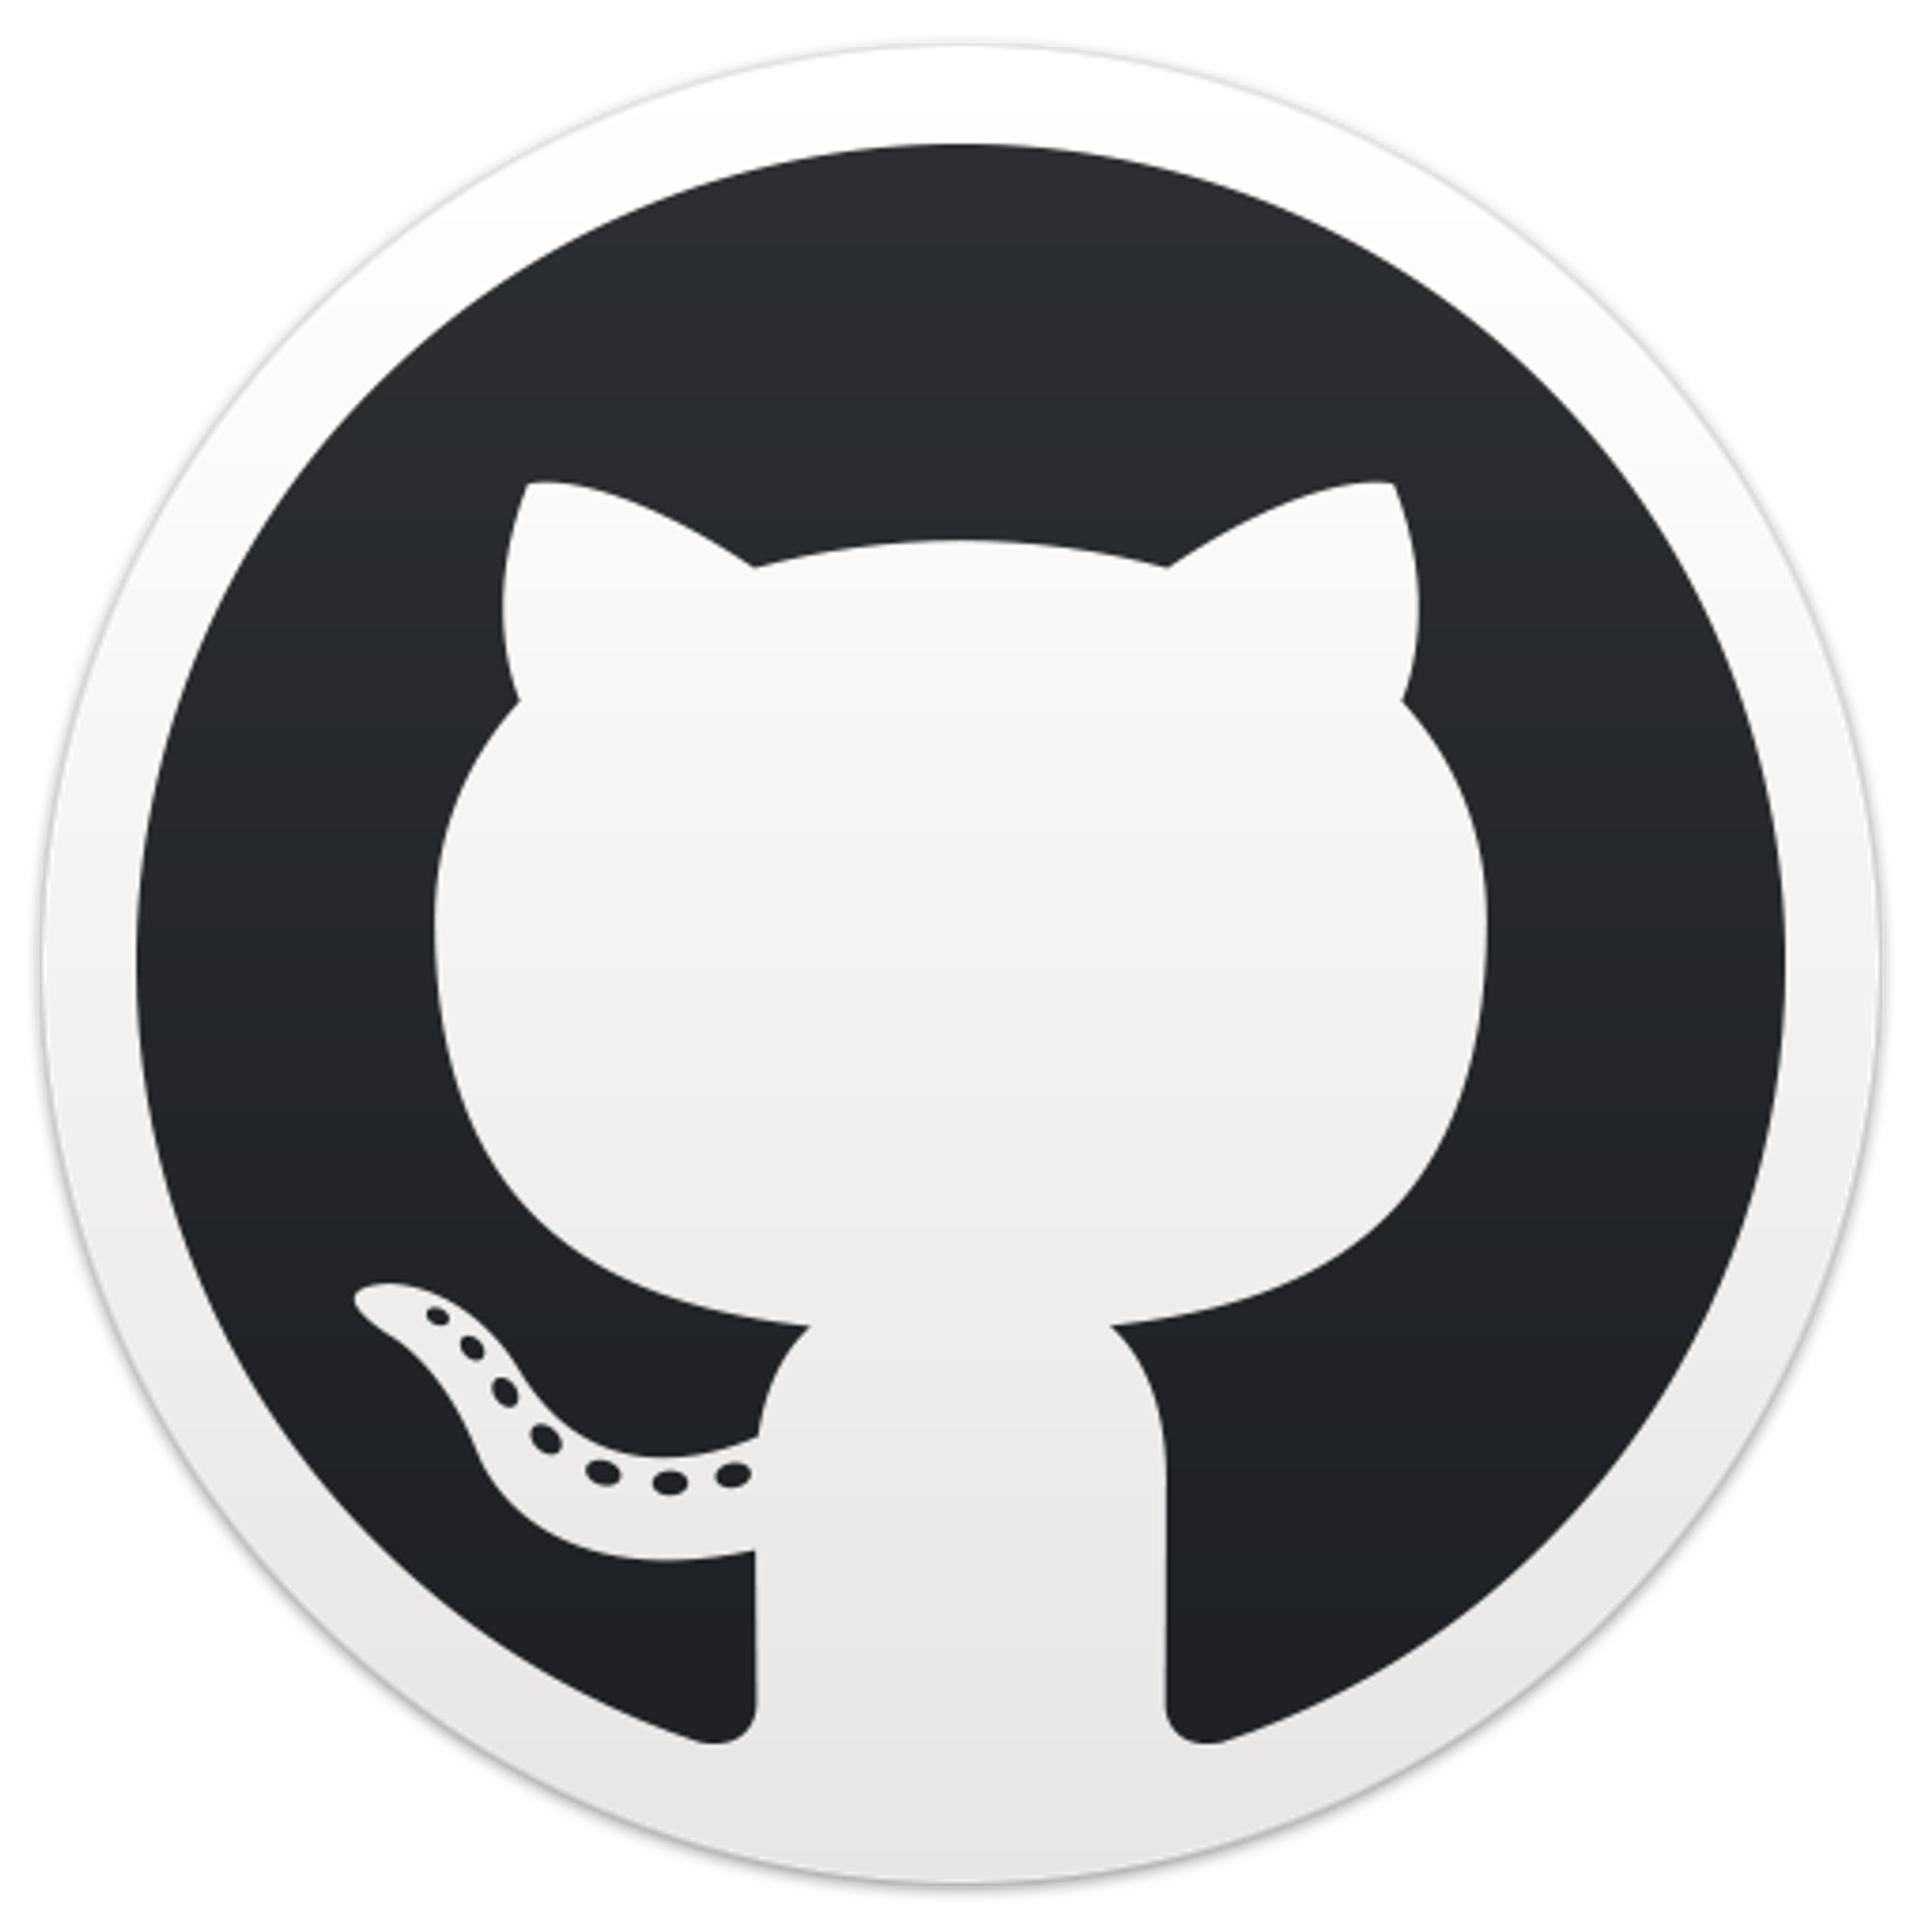 GitHub - pmndrs/jotai: 👻 Primitive and flexible state management for React